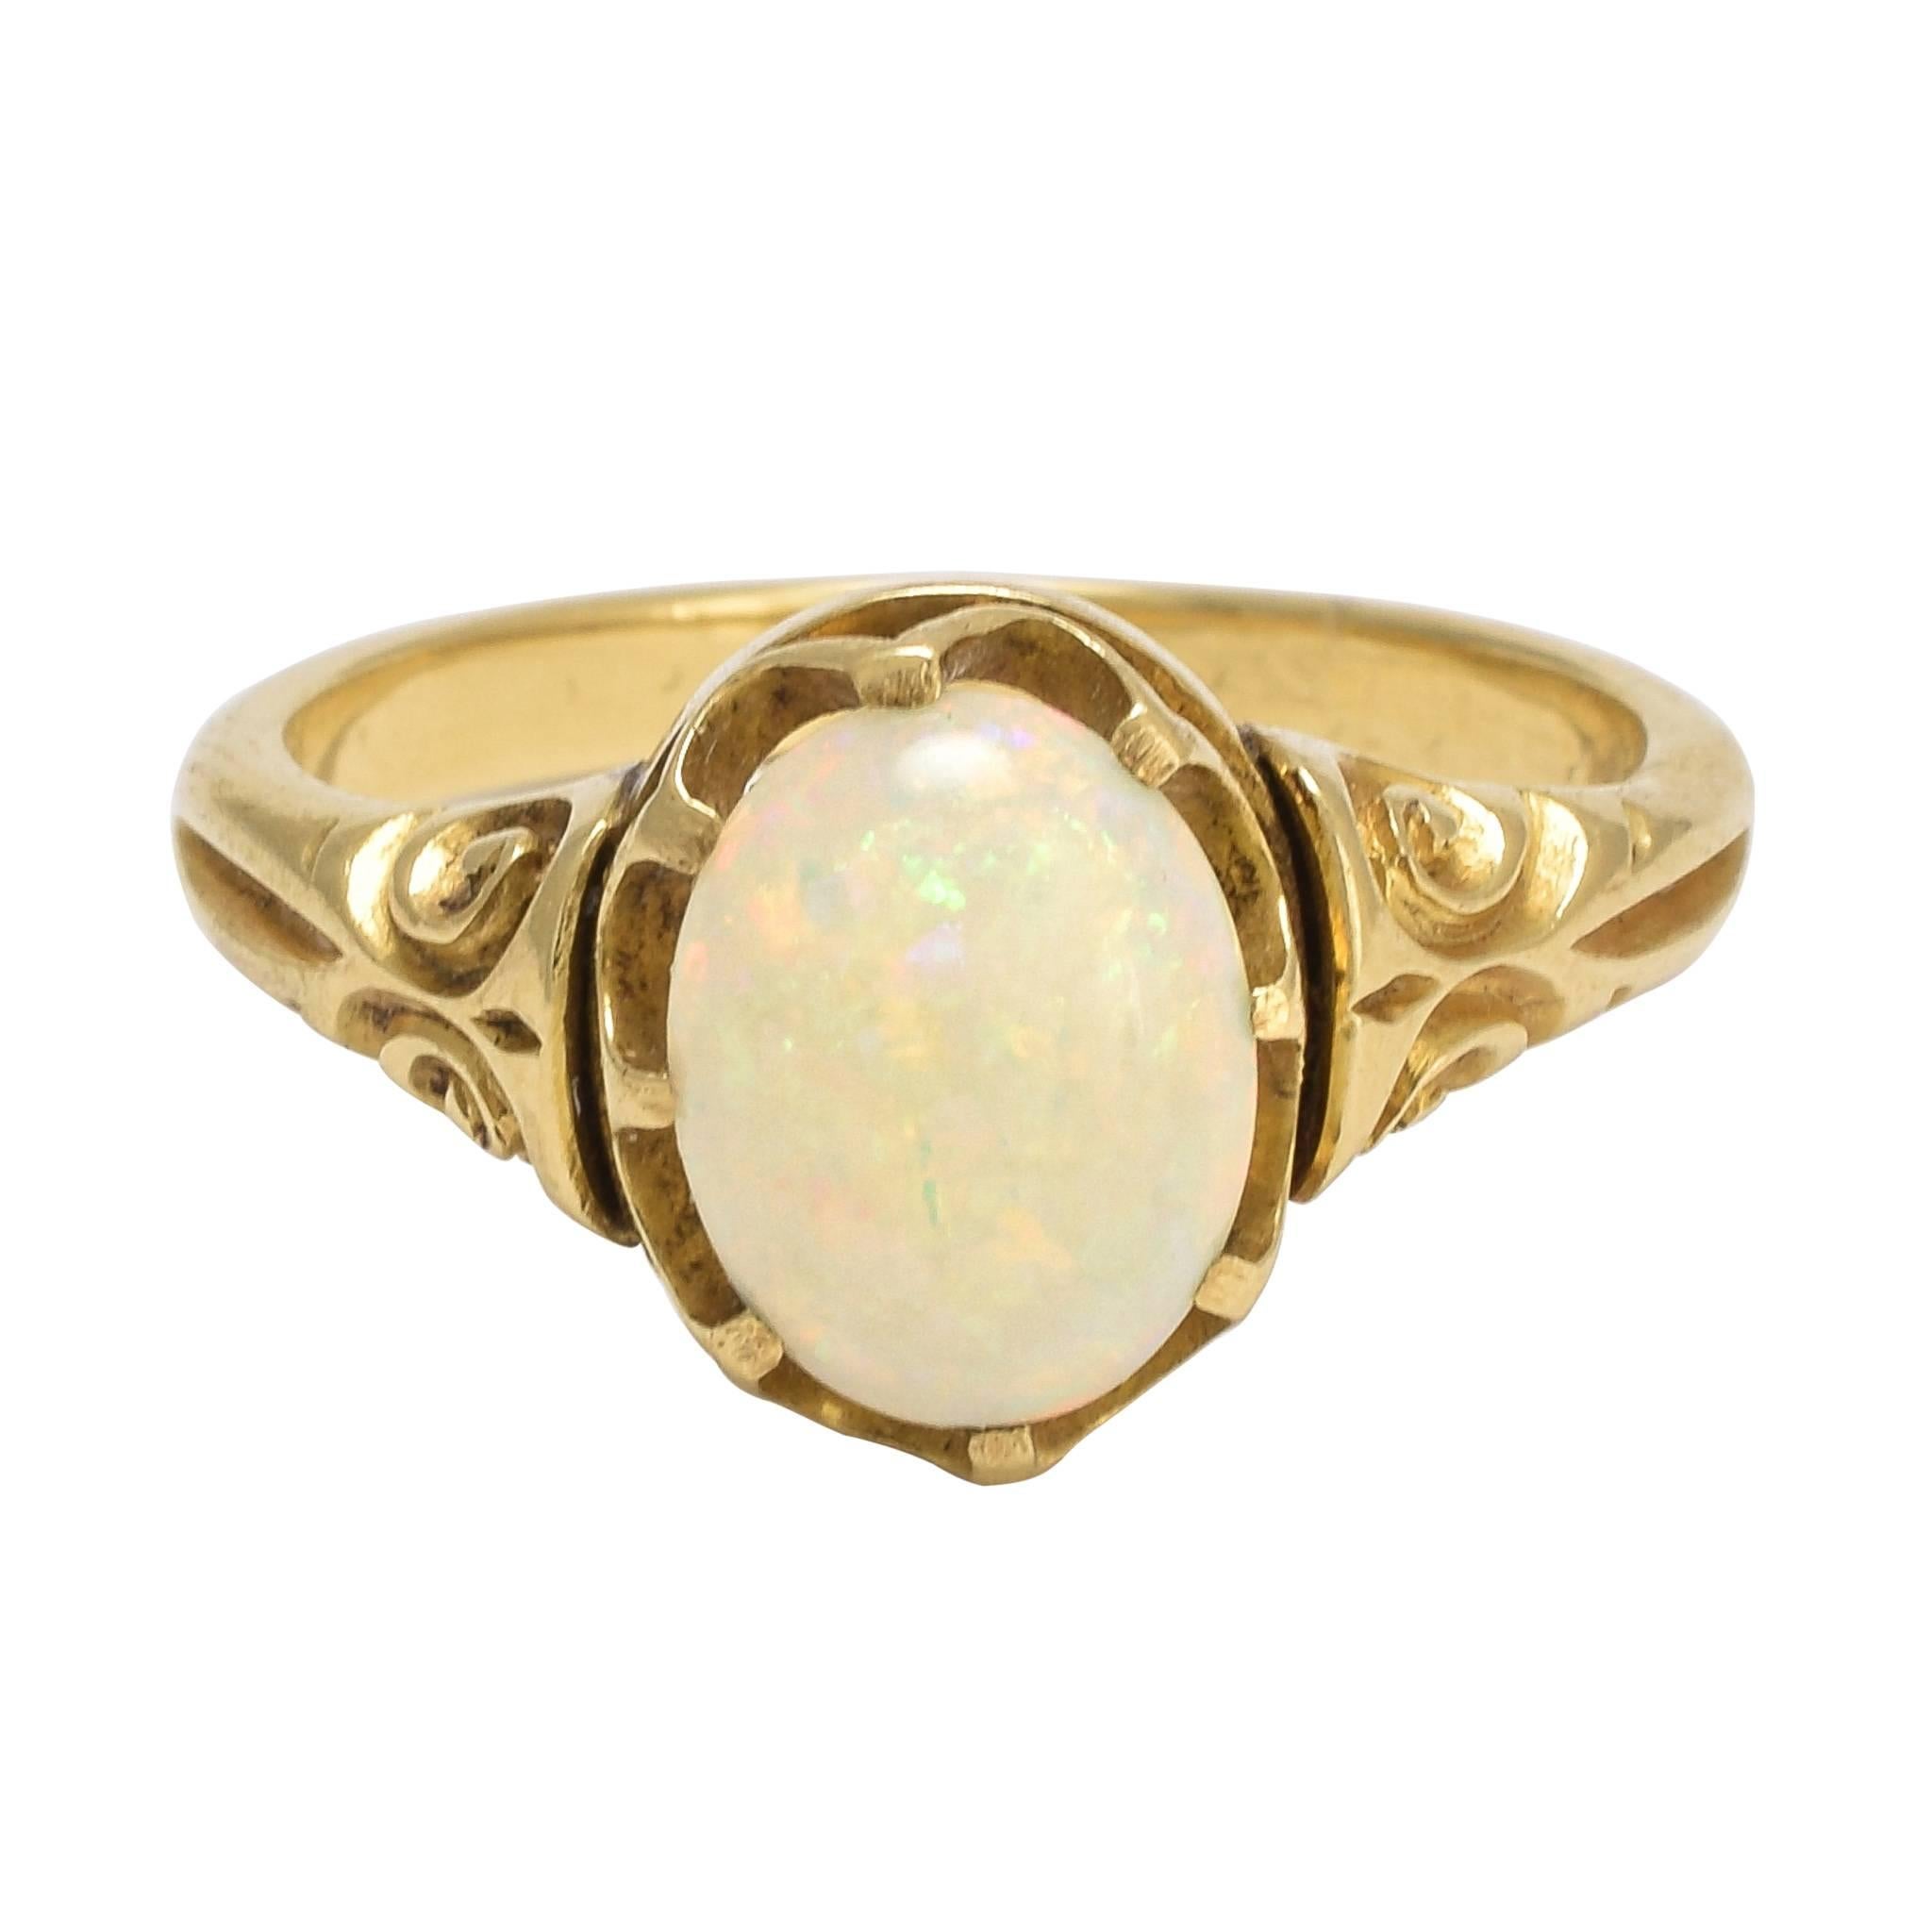 Antique Victorian Opal Scrolled Gold Ring